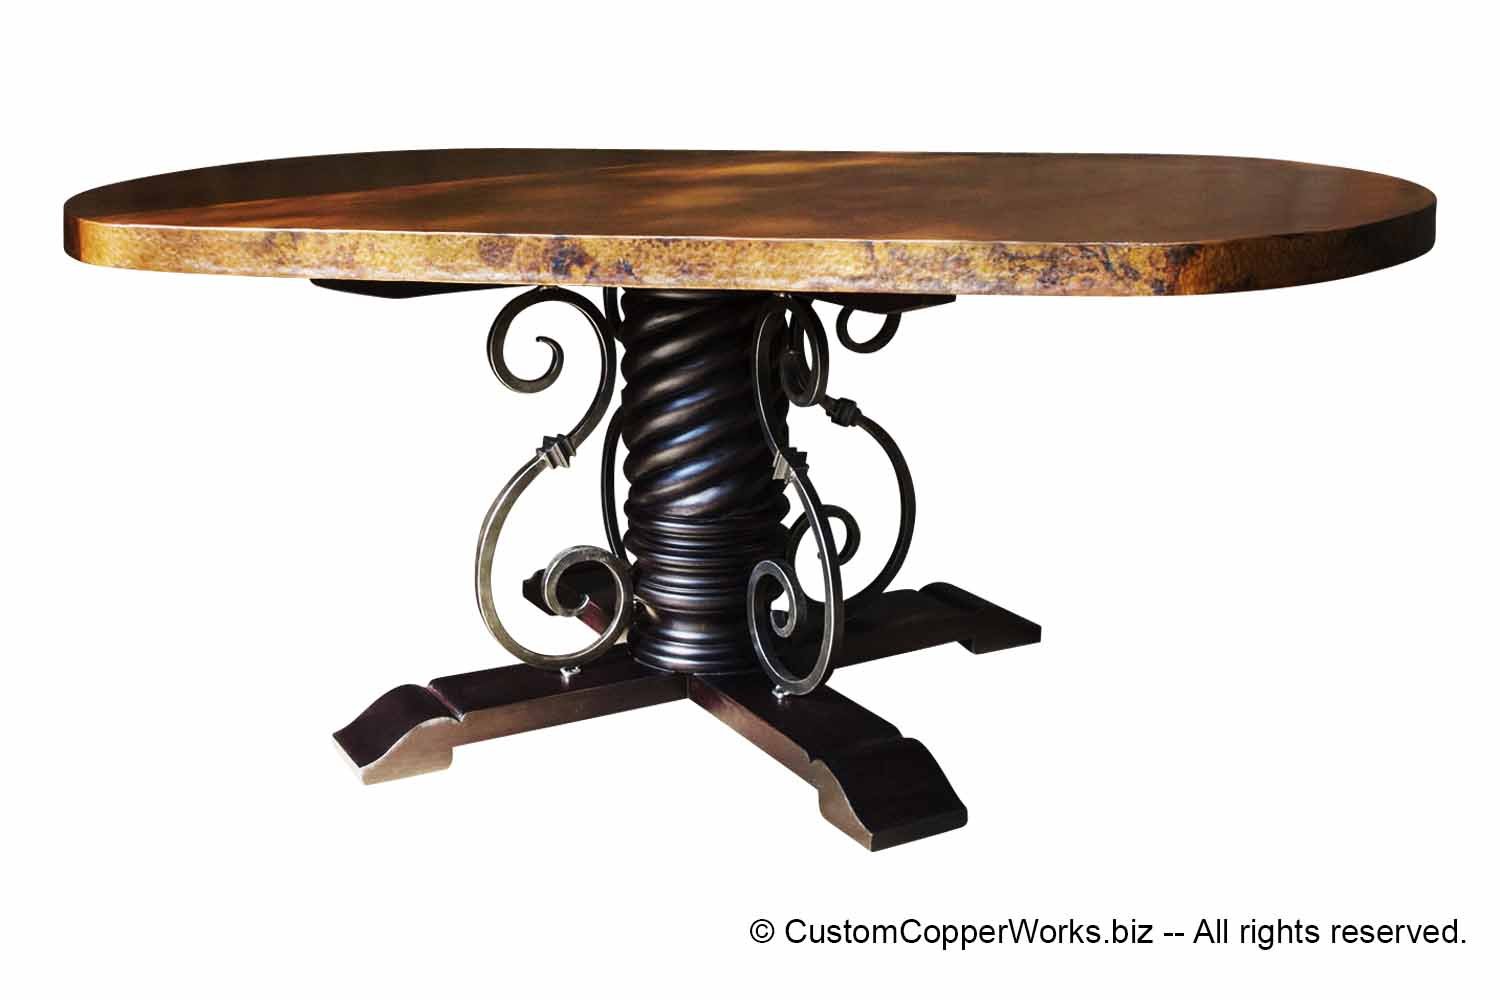 oval-copper-top-dining-table-wood-forged-iron-pedestal-table-base-136-1.jpg